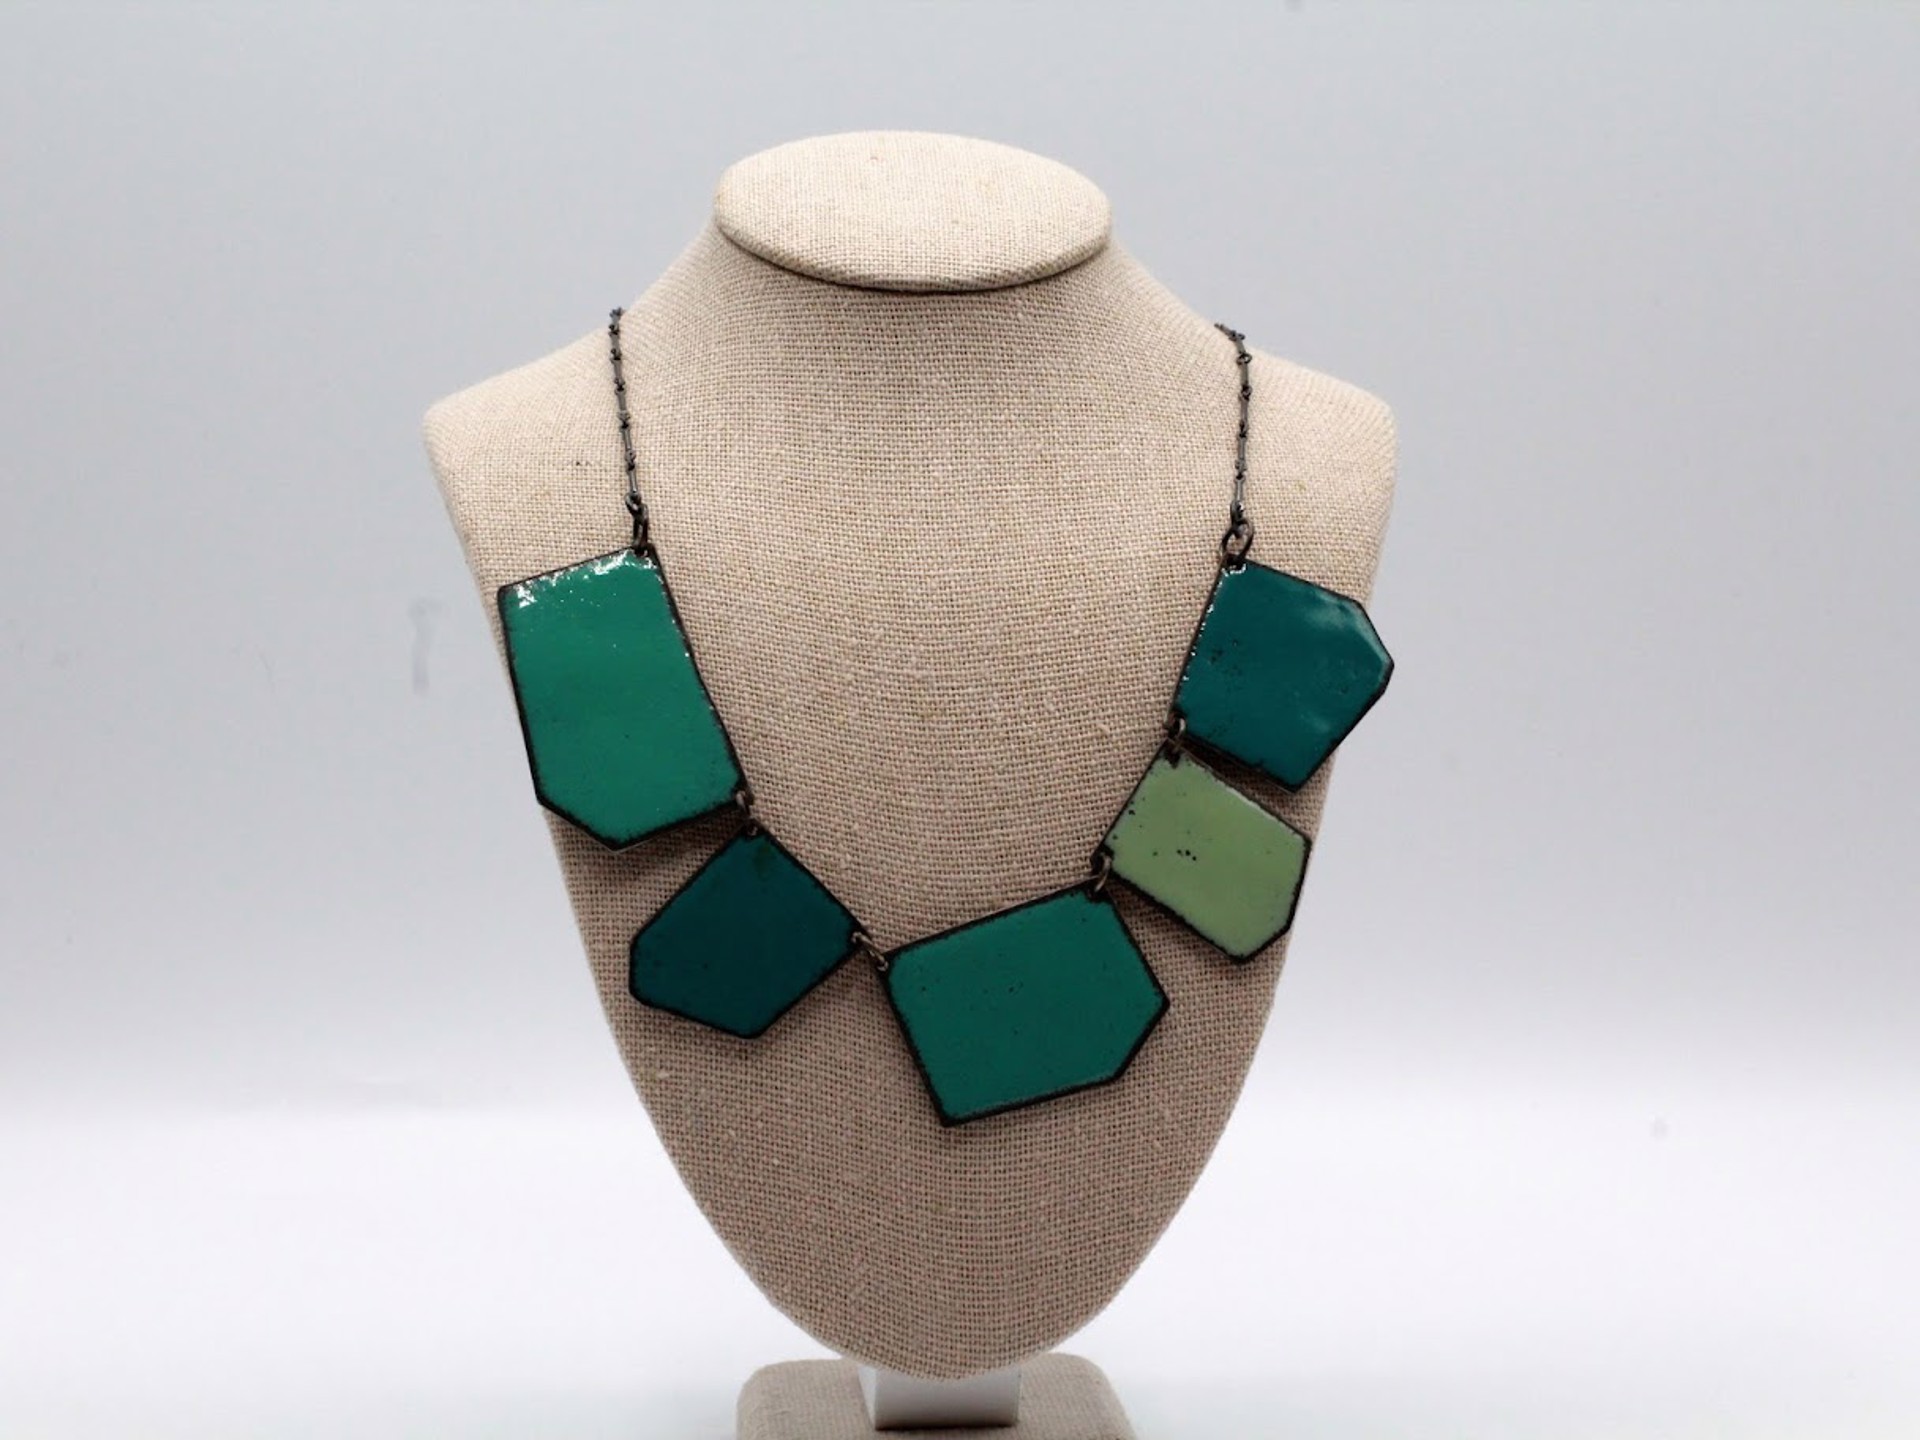 Tertiary Necklace - Turquoise by April Hale